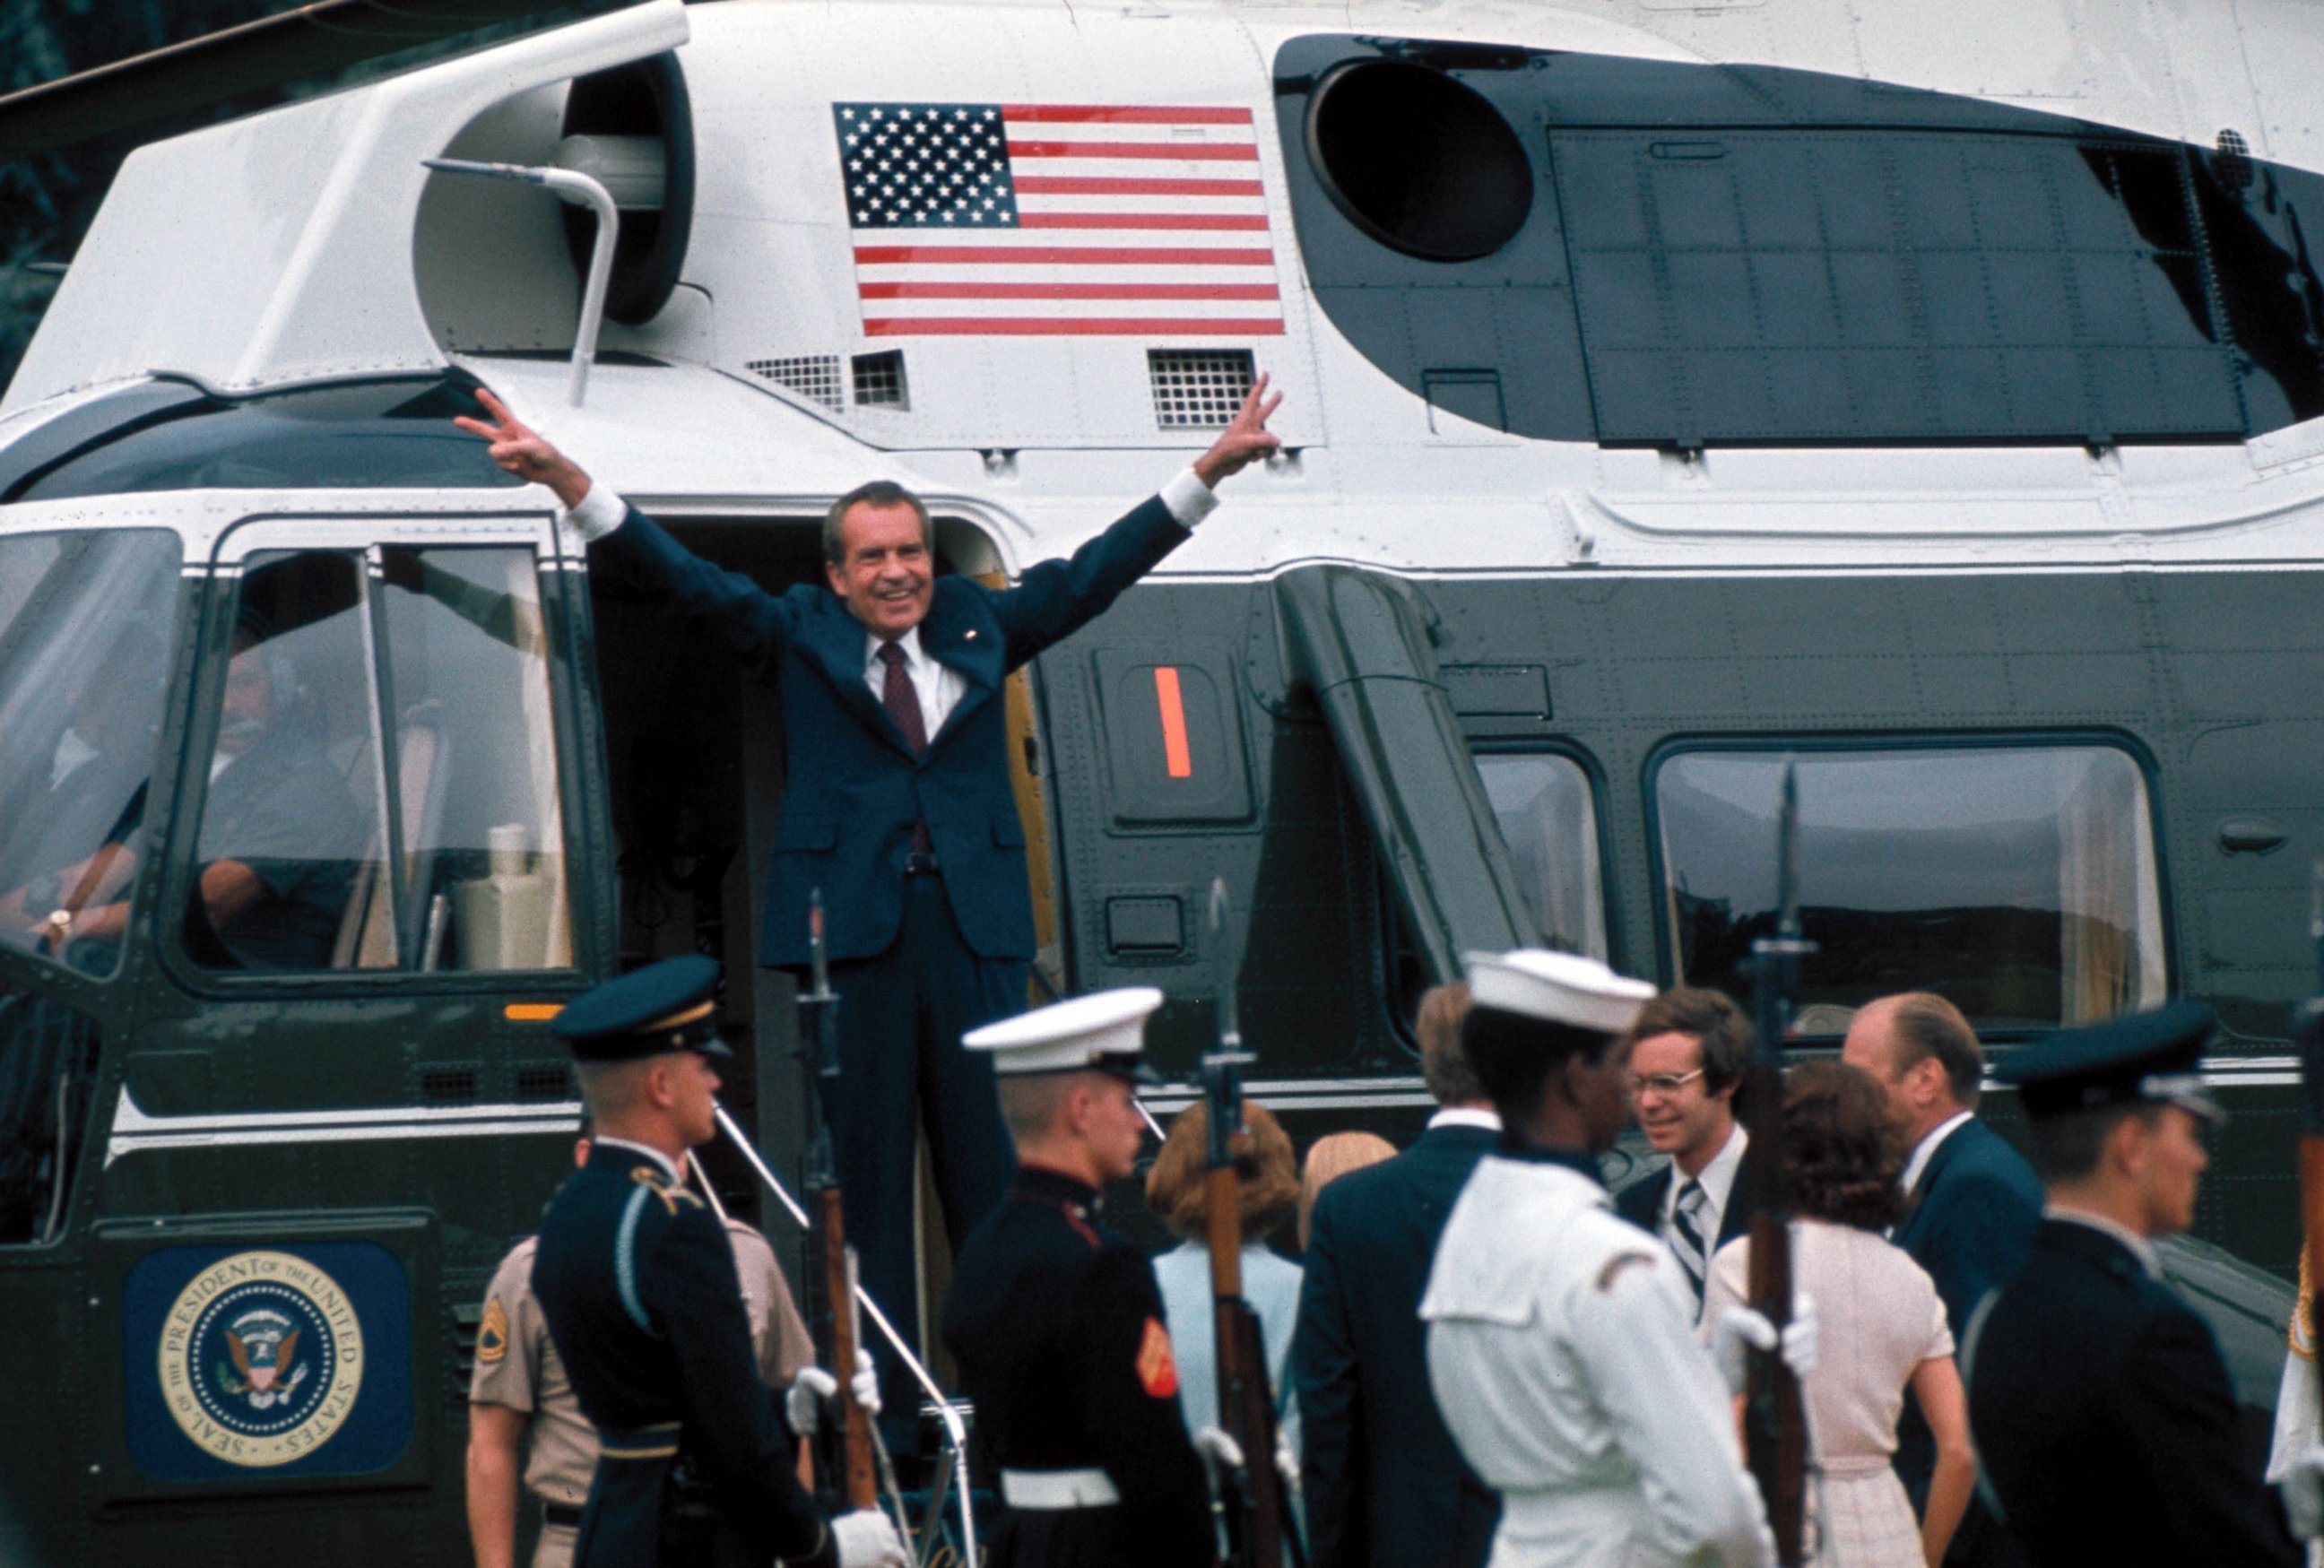 PHOTO: President Richard Nixon raises his hands with his trademark "V" sign in the doorway of a helicopter after leaving the White House following his resignation over the Watergate scandal, Aug. 9, 1974. 